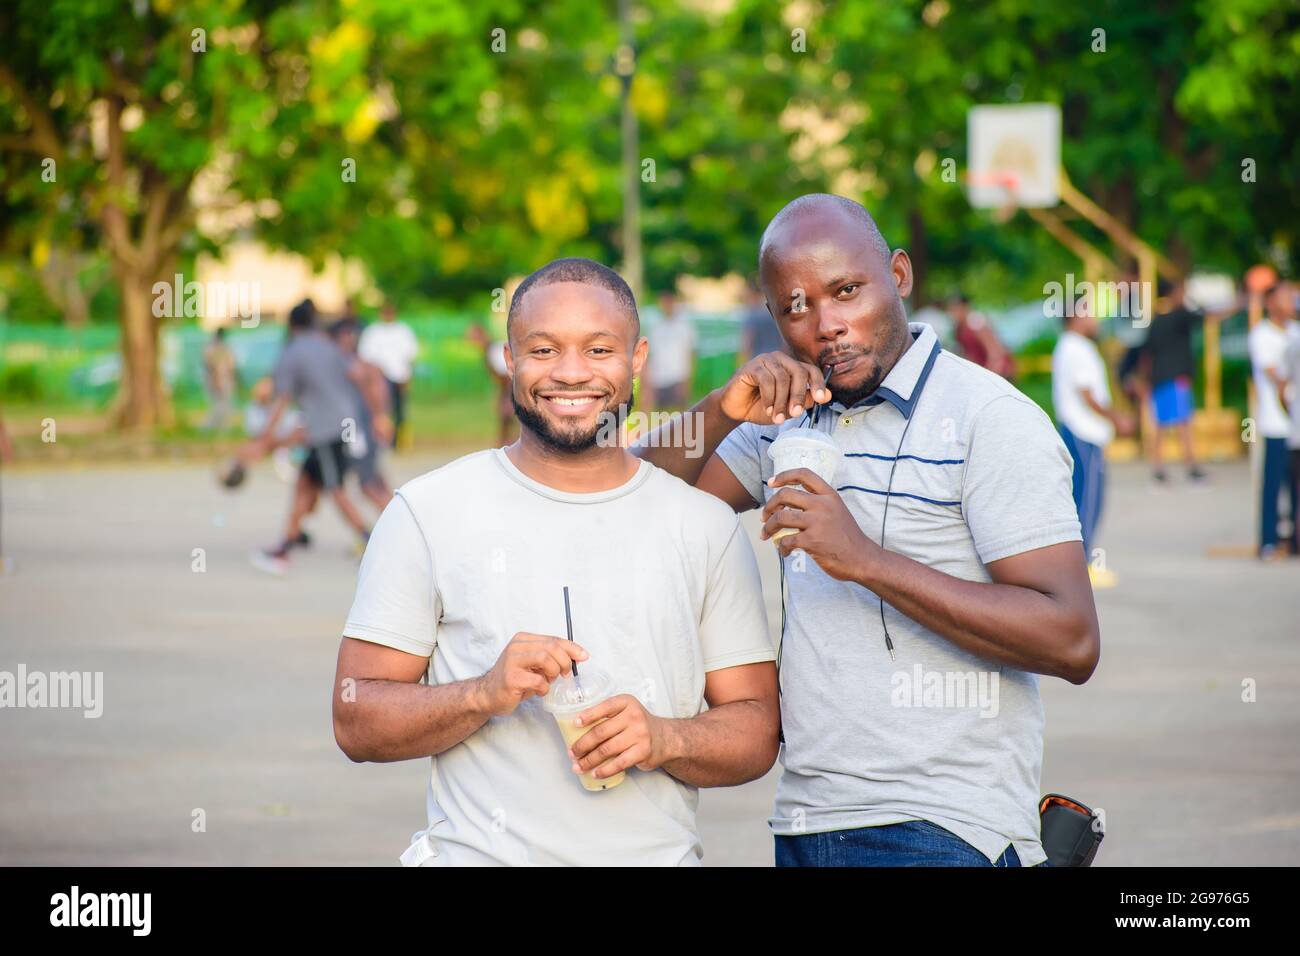 two male African friends standing and joyfully drinking fruit juice in an outdoor park in their leisure time Stock Photo